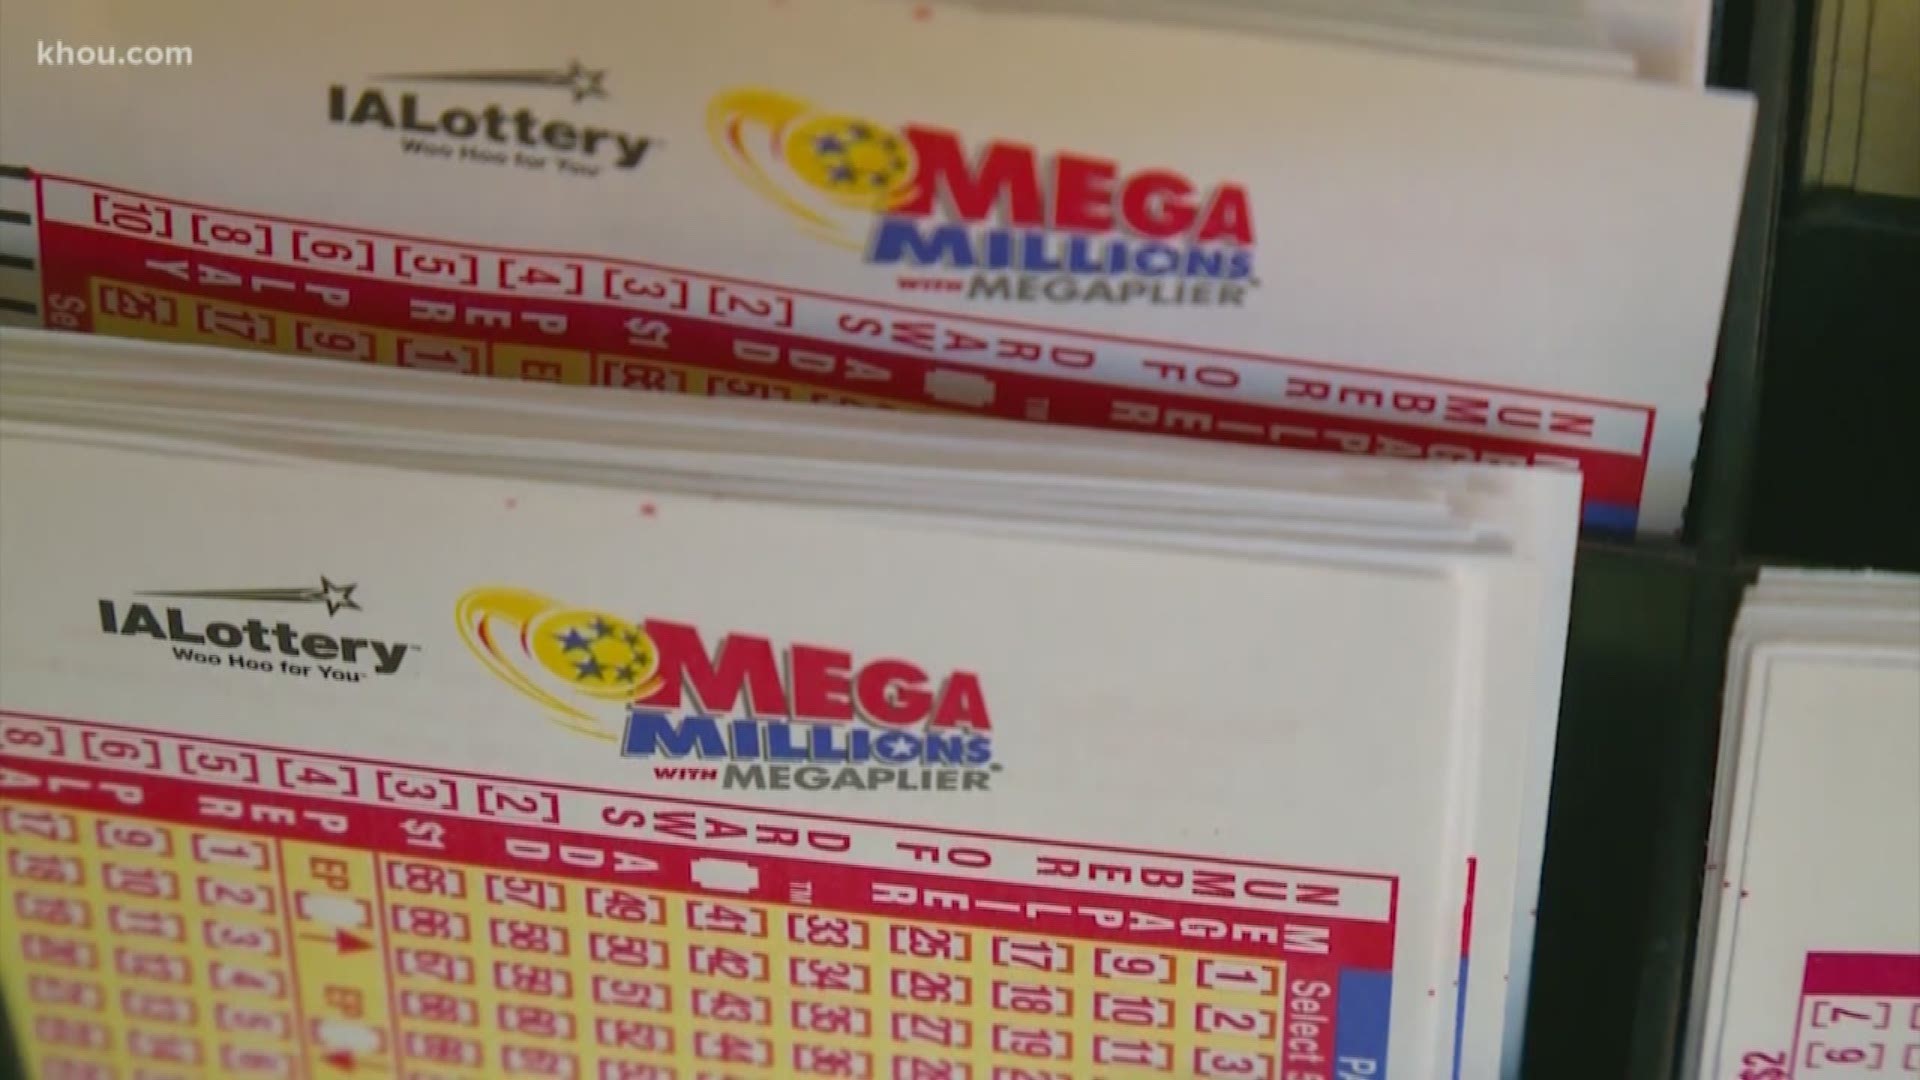 The two lotteries combined are currently valued at more than $2.2 billion. The Mega Millions payout is the biggest lottery jackpot in U.S. history.